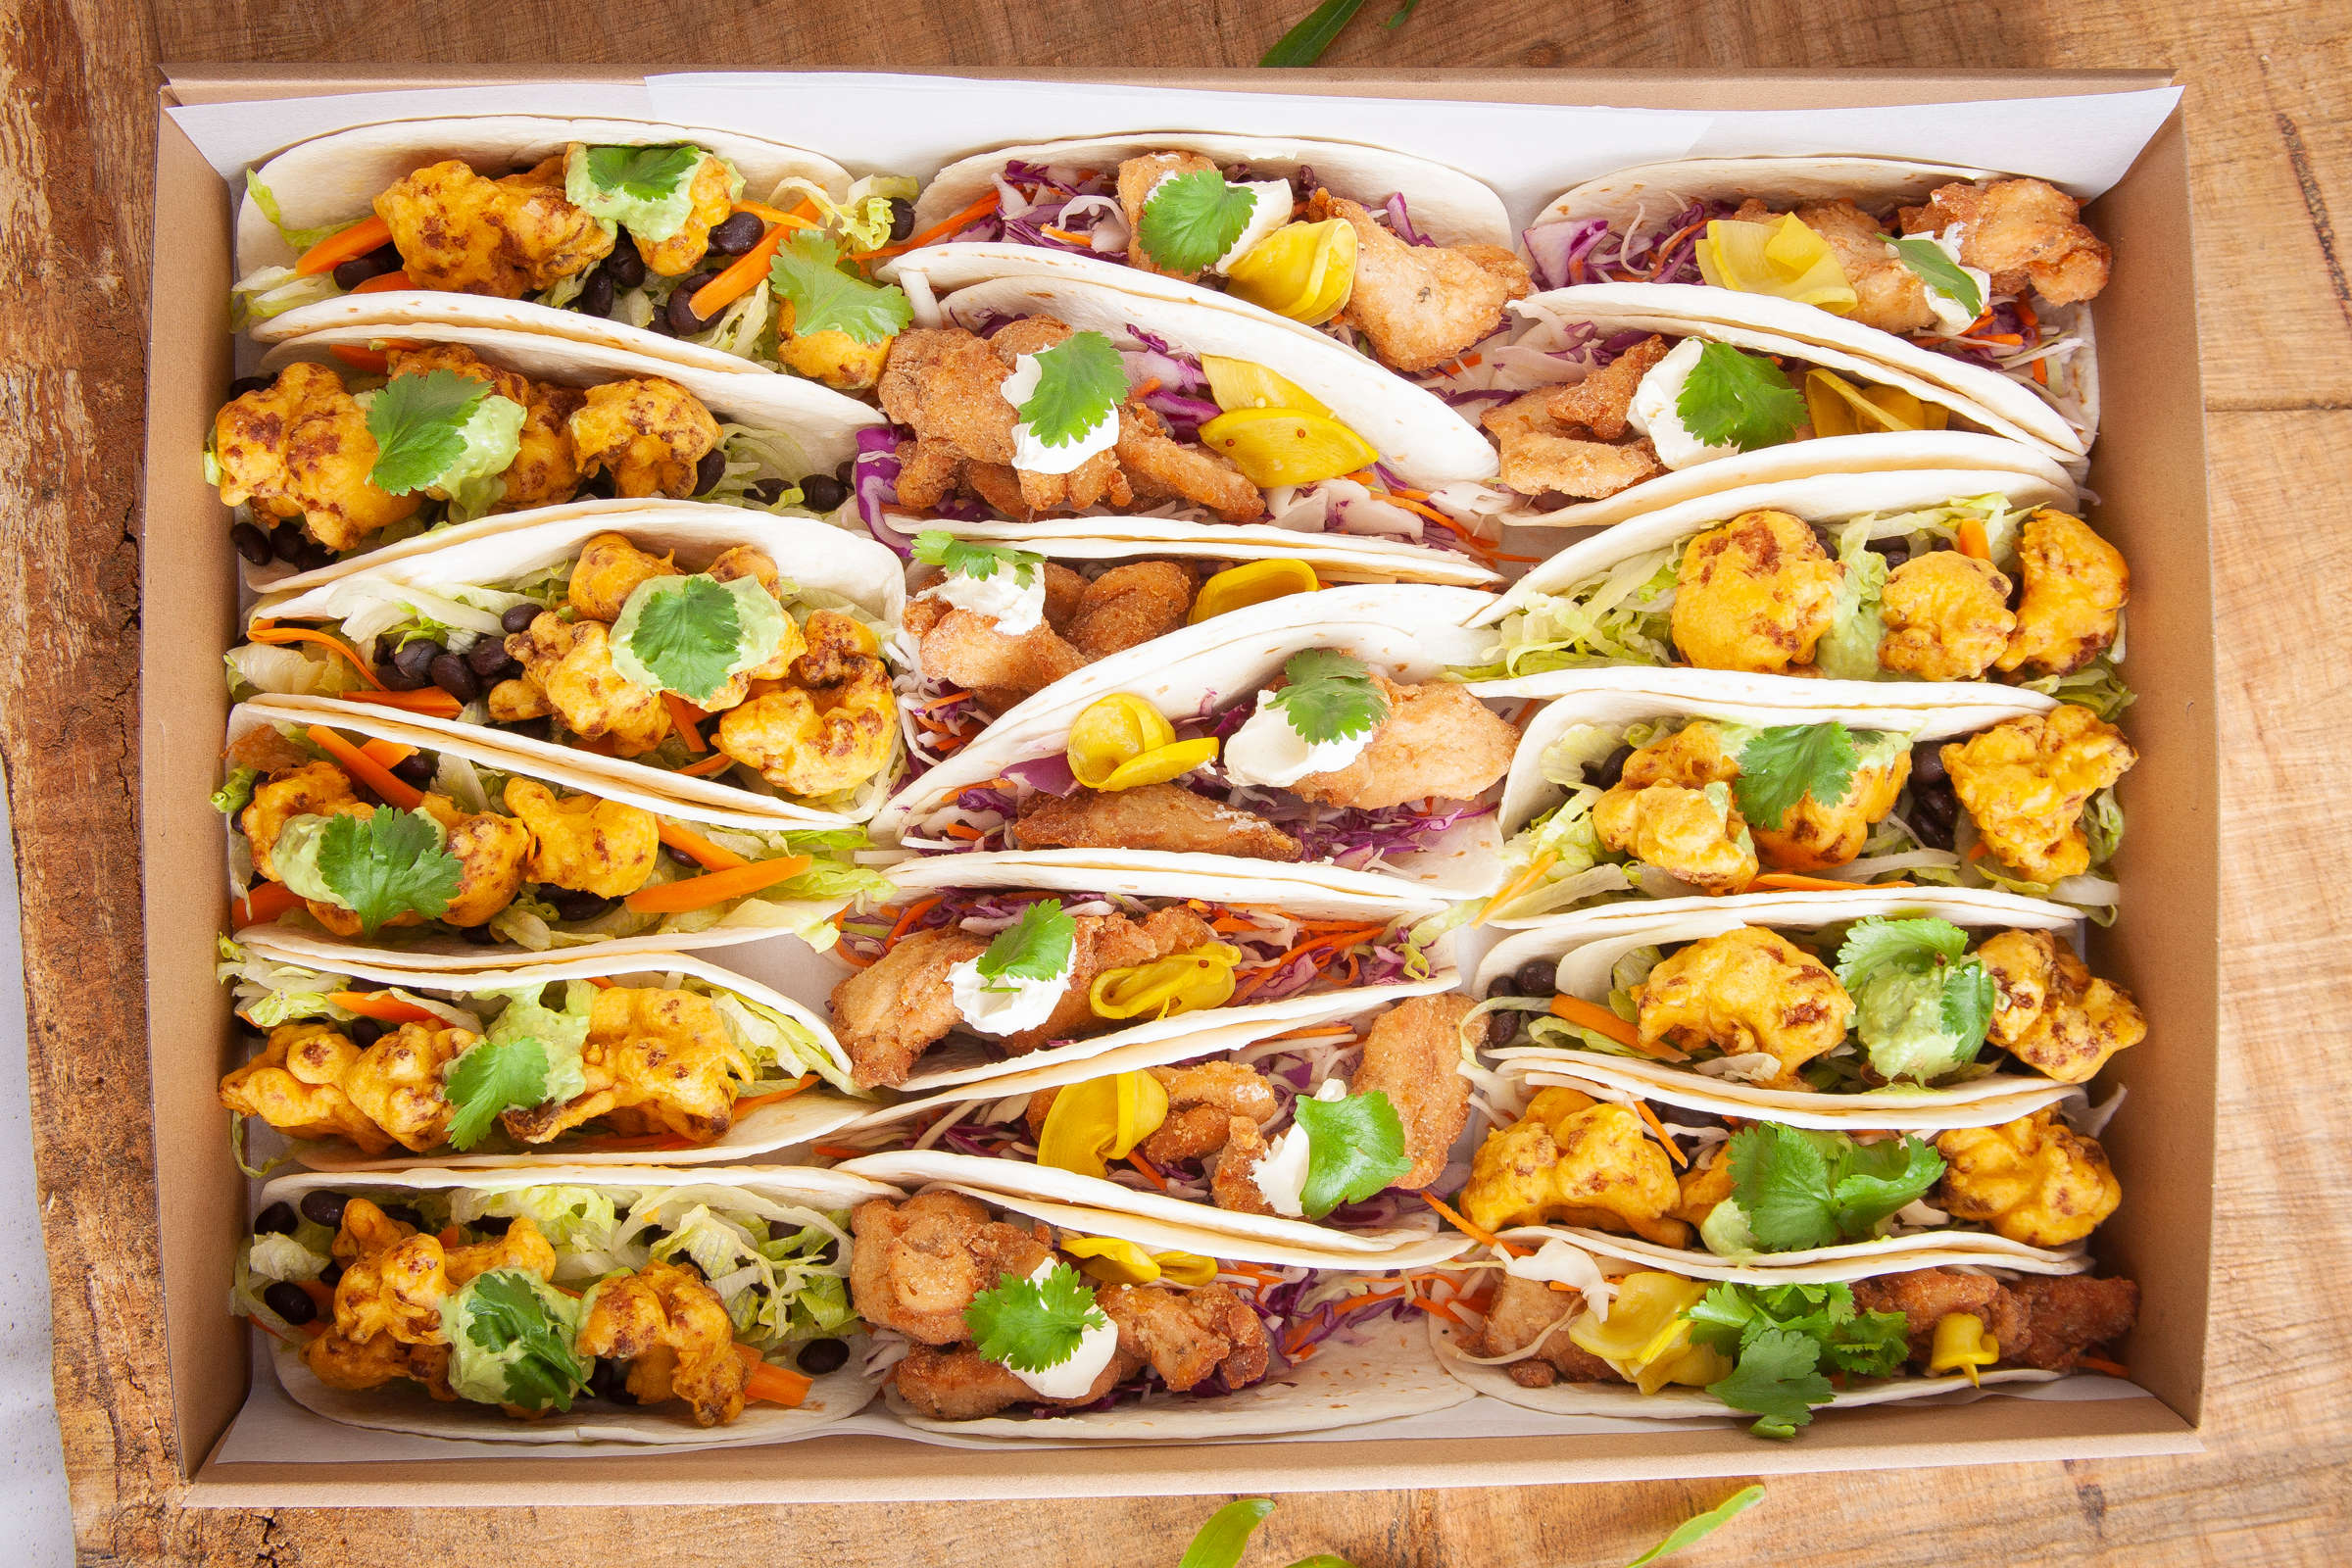 Large Taco box containing 20 tacos fillings include fried chicken and fried cauliflower. Credit: Richard Jupe.